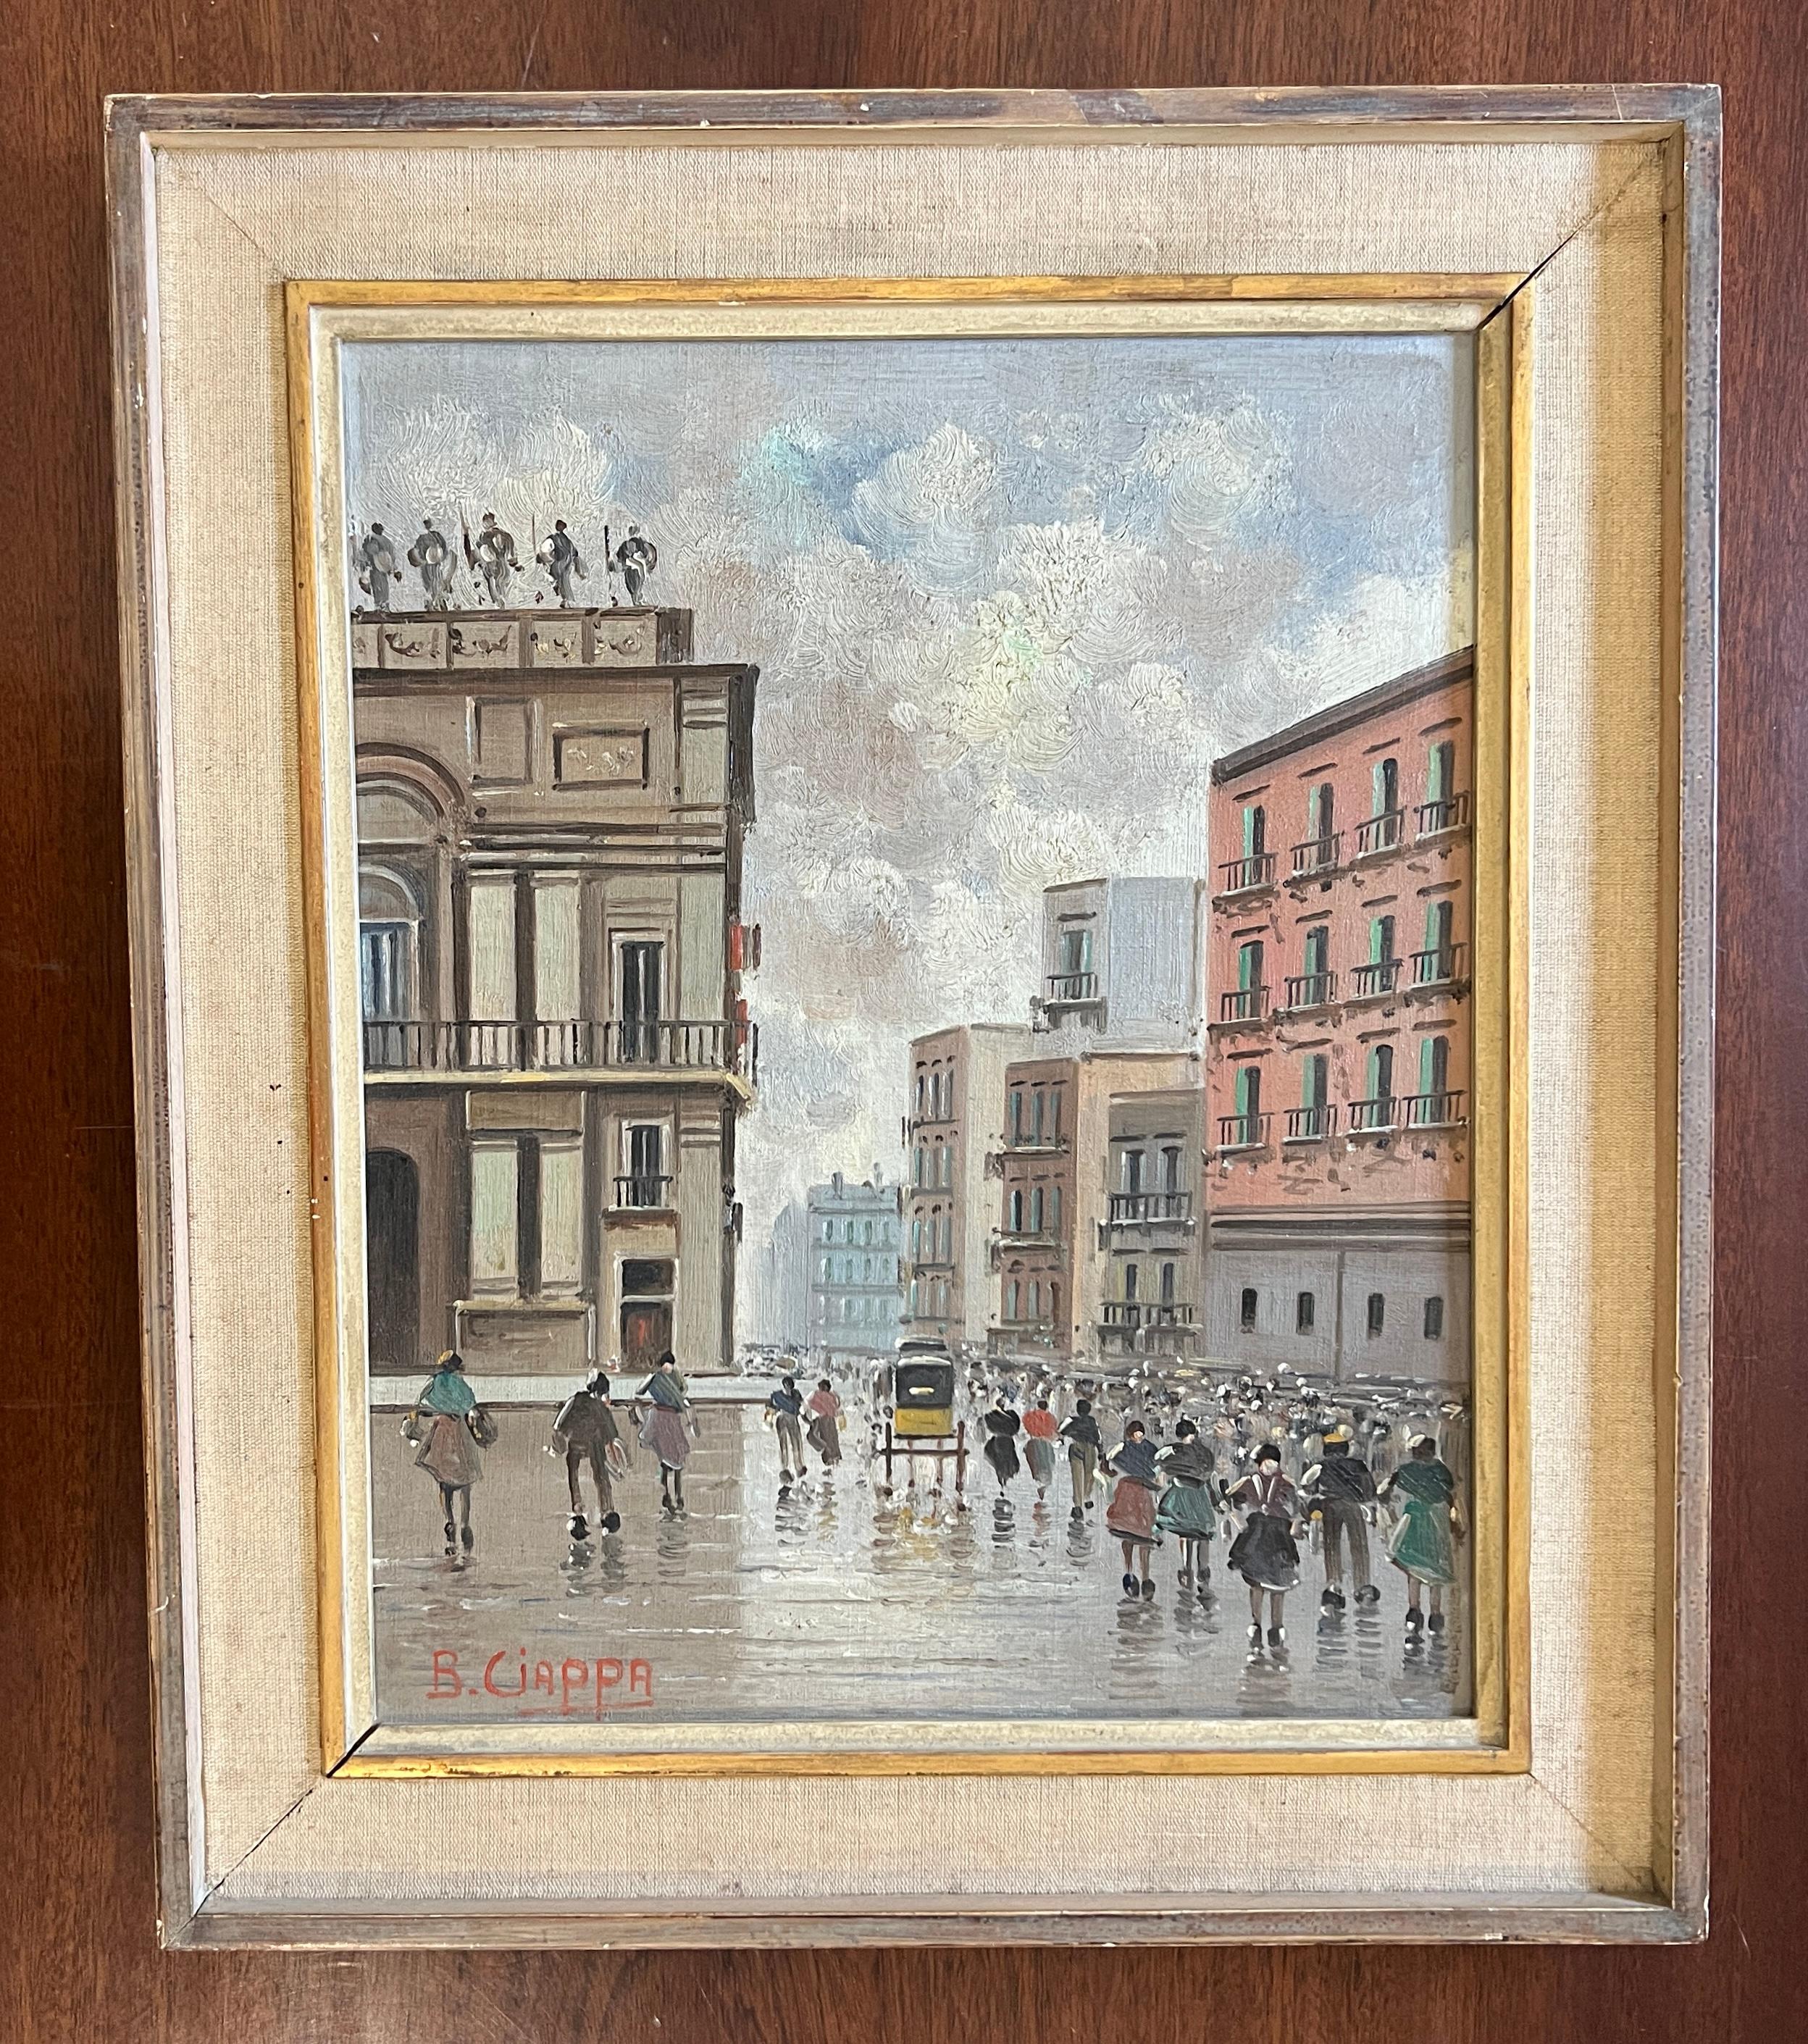 Busy square, Italy - Painting by B. Ciappa